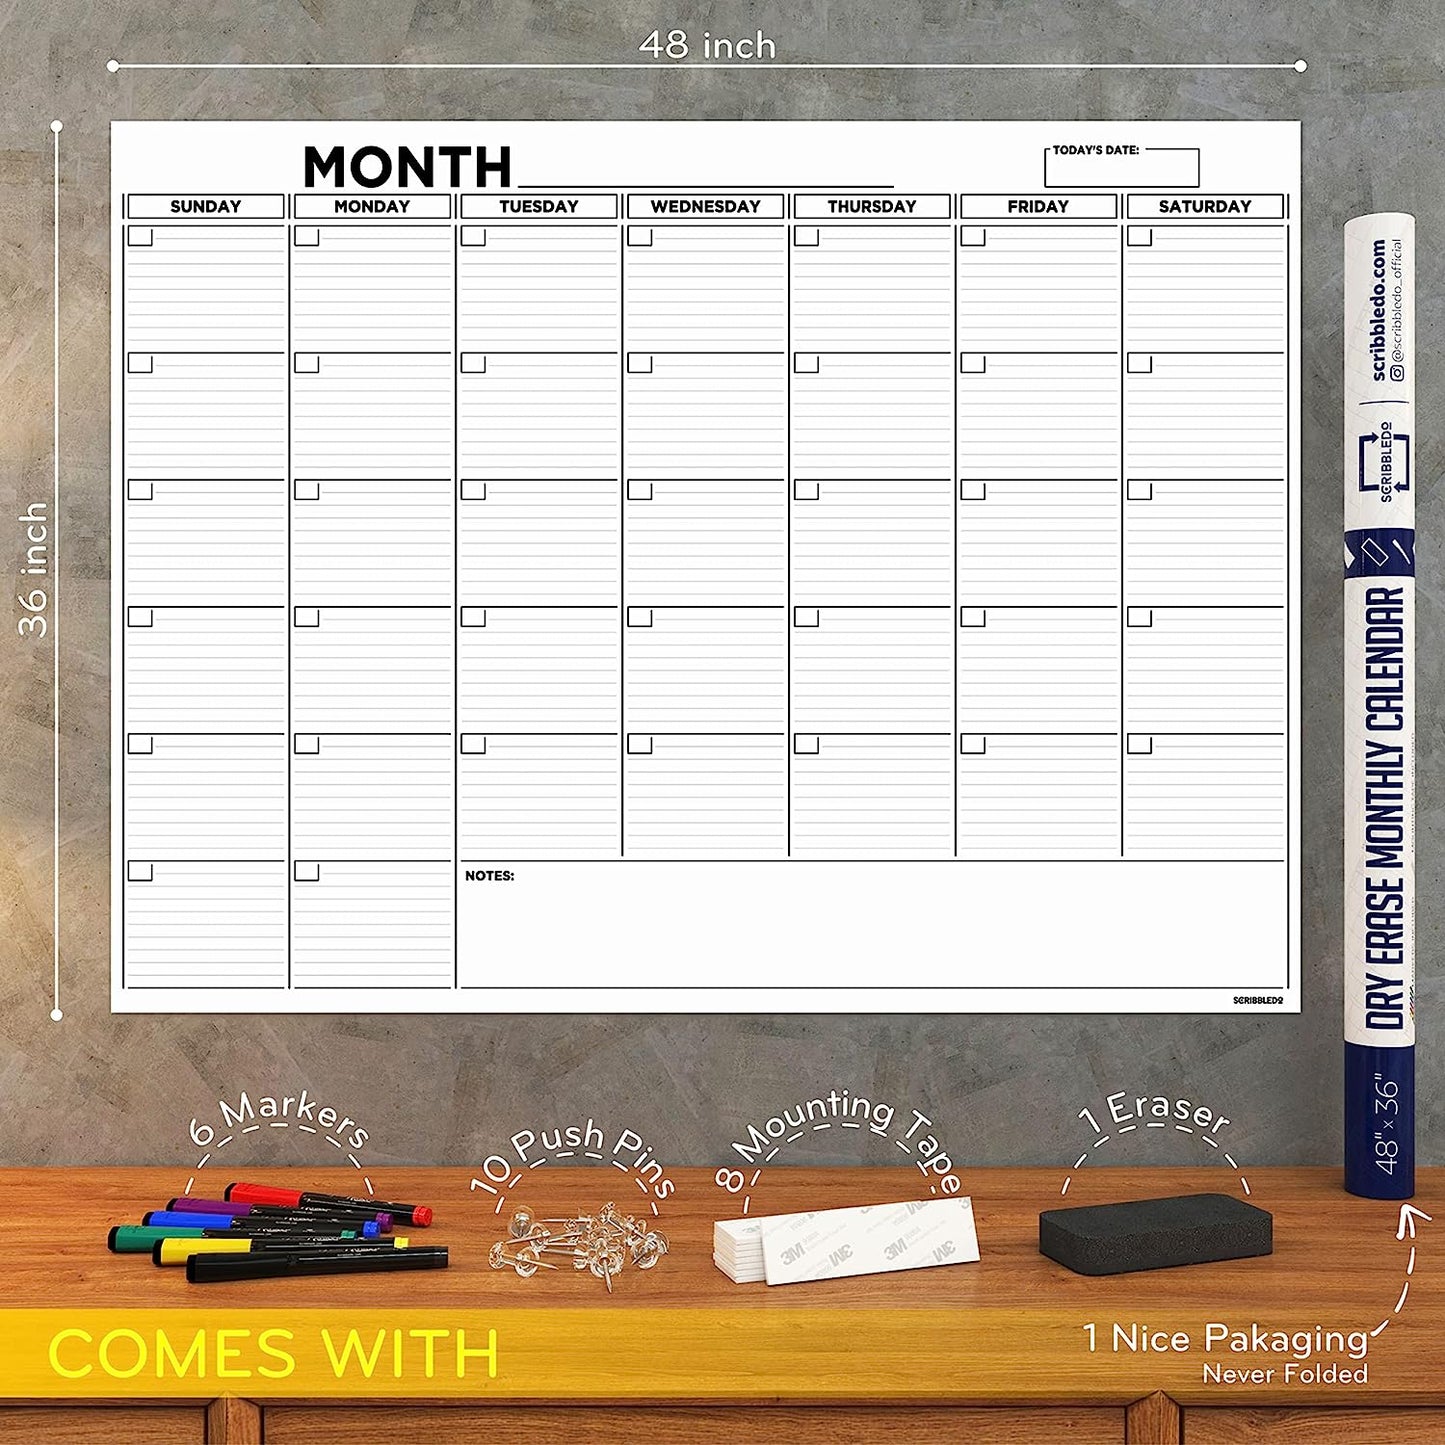 2023 monthly calendar for offices with markers and eraser 36x48